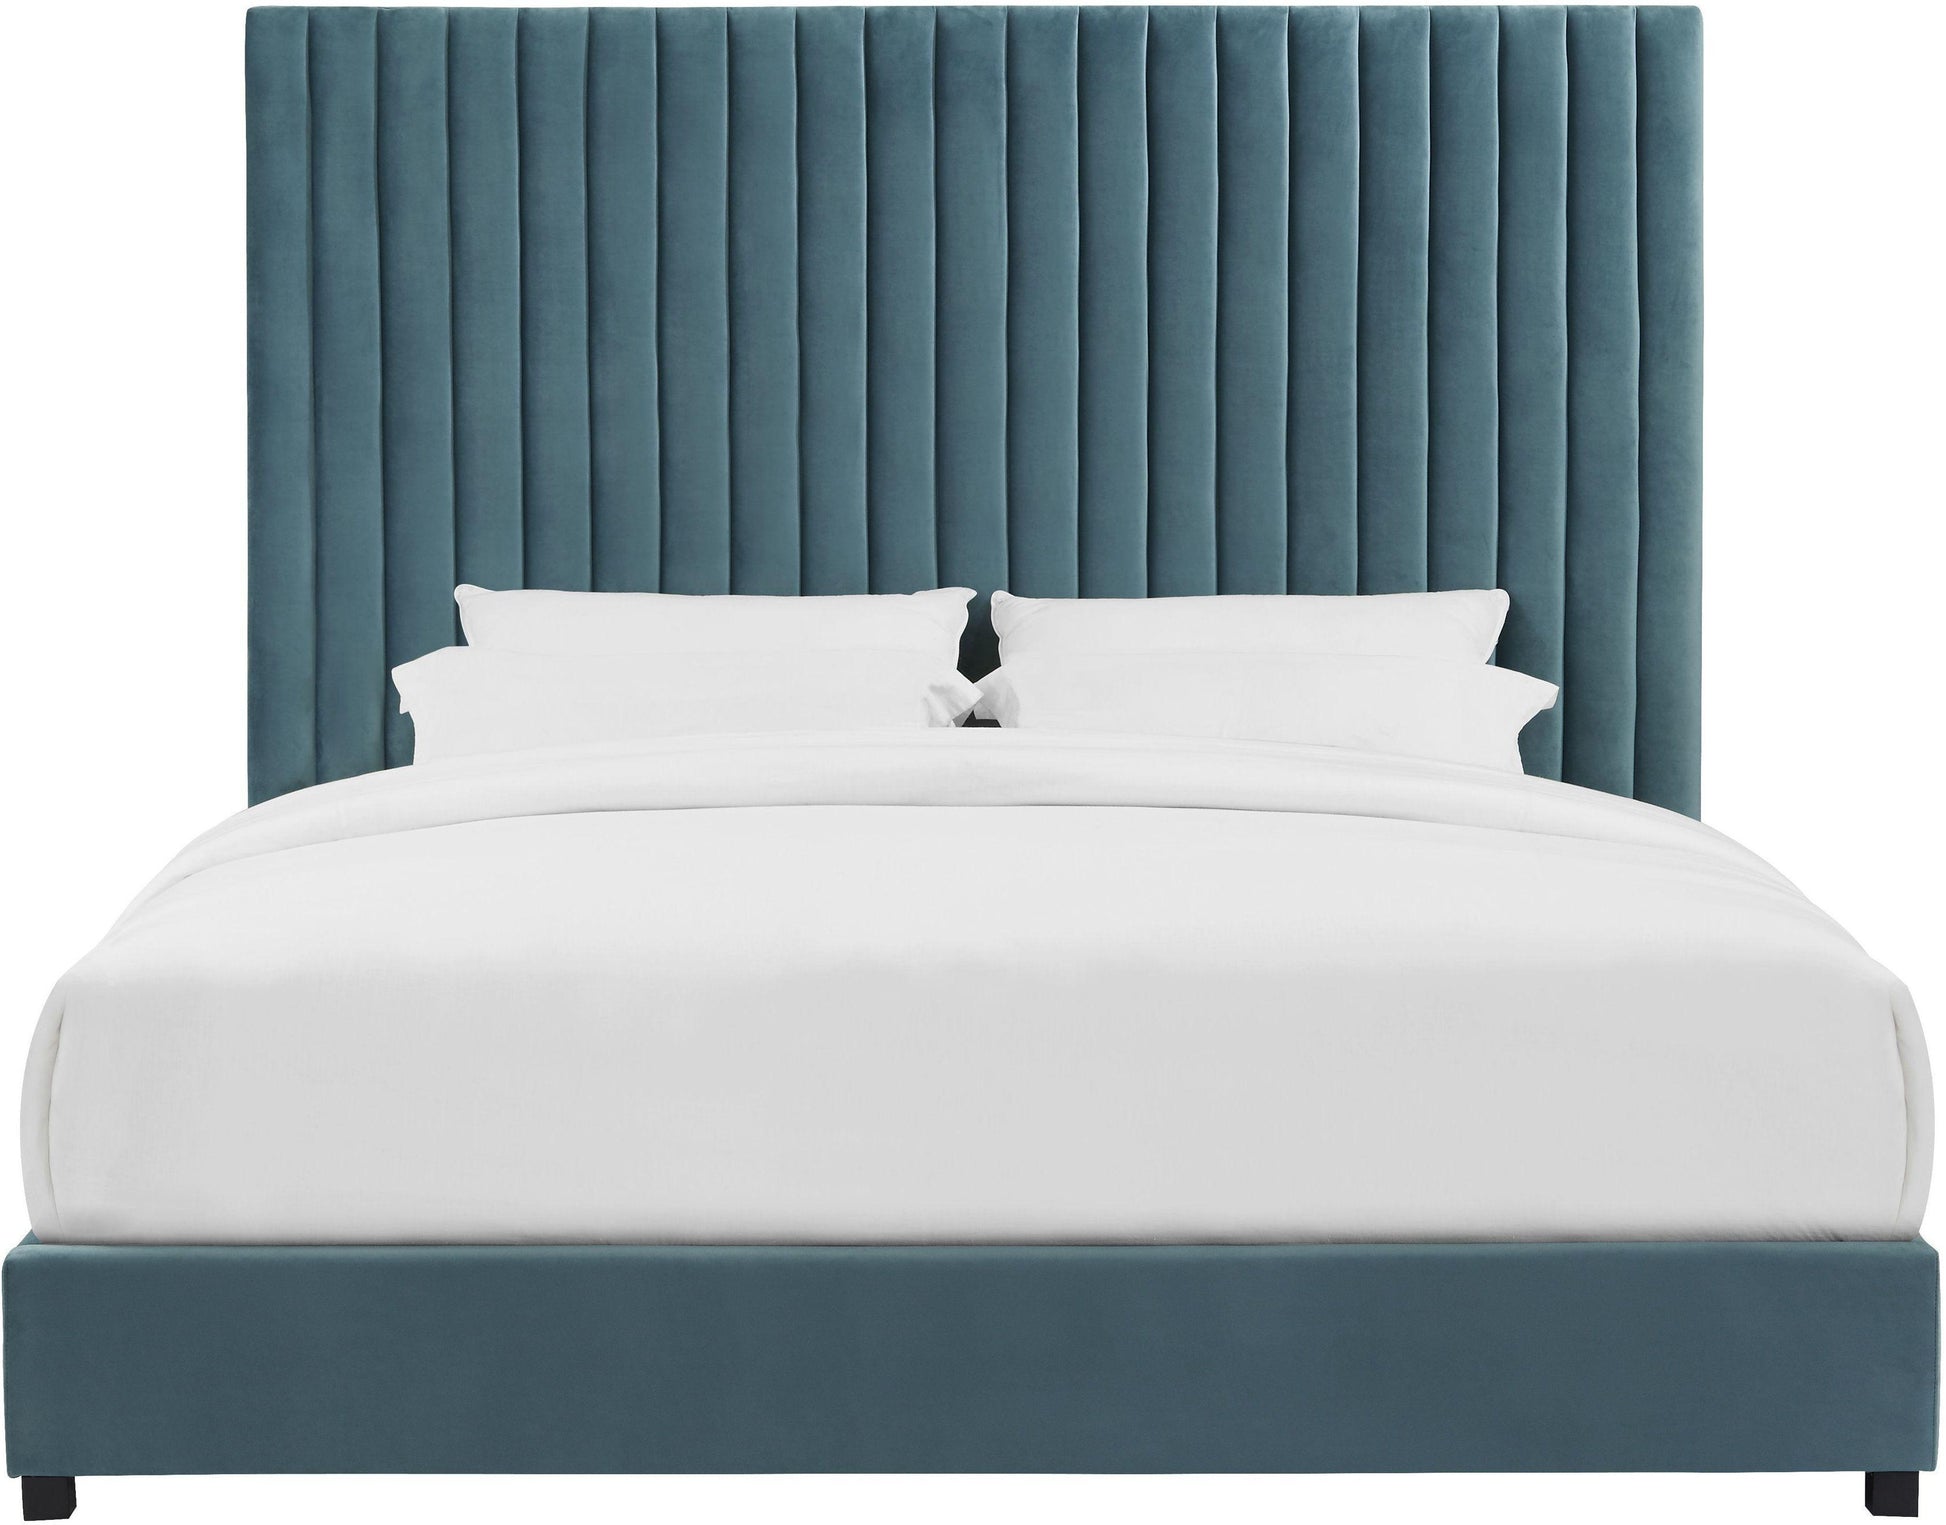 Arabelle Sea Blue Bed King by TOV